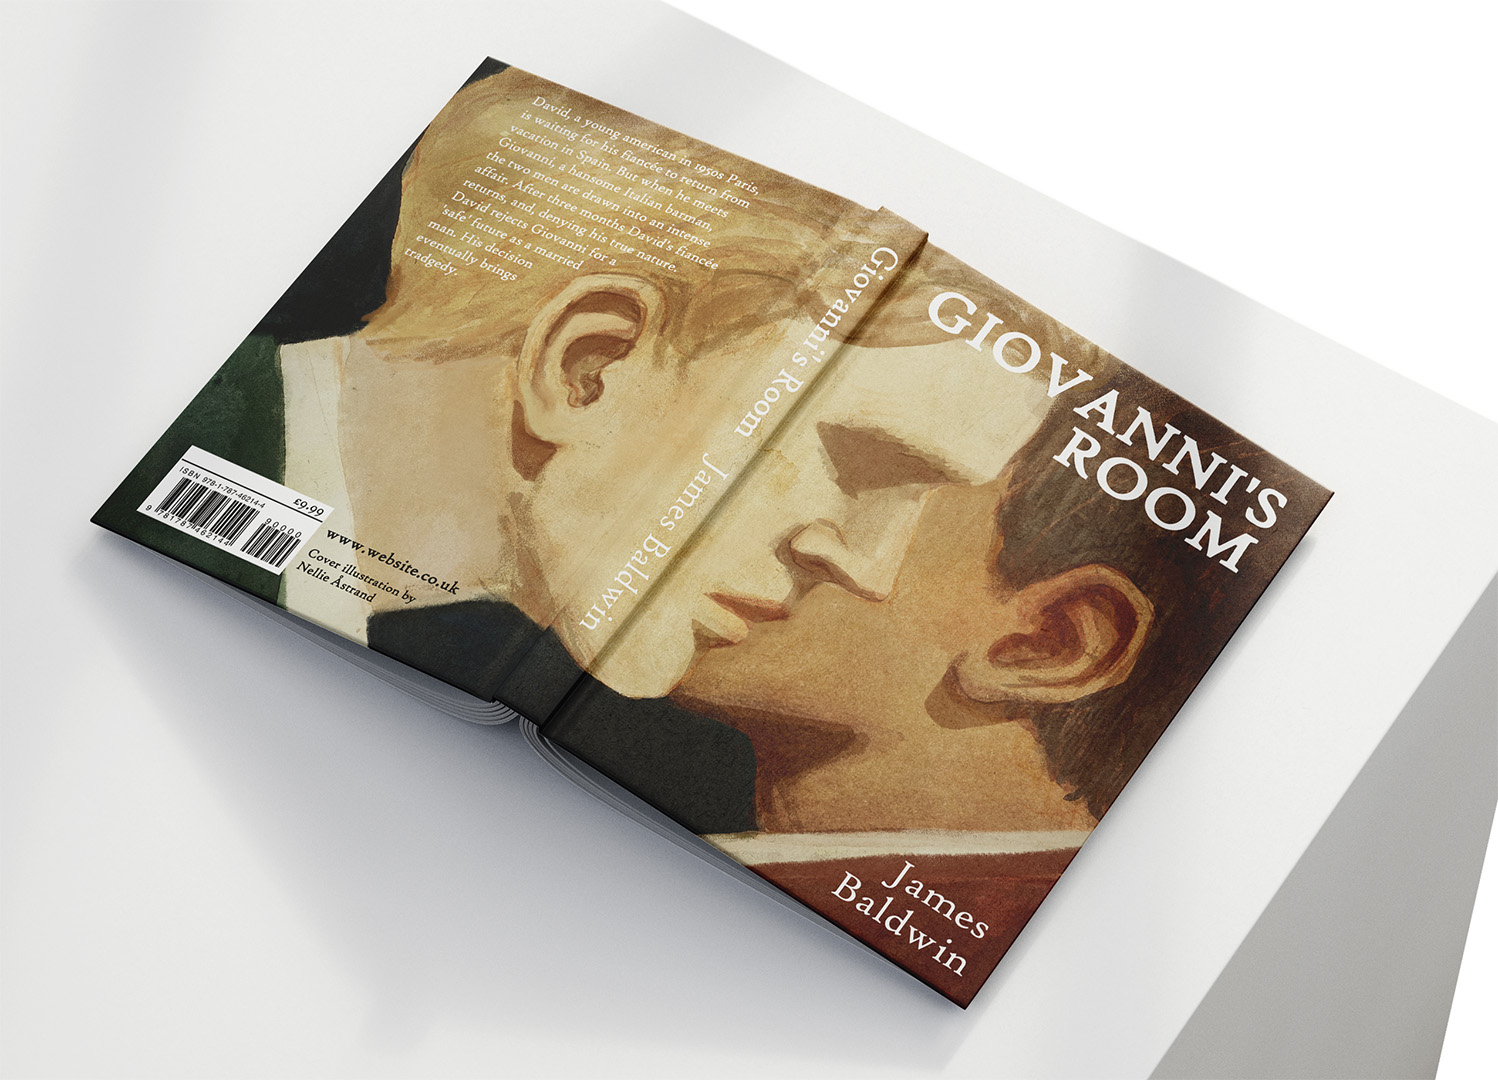 Book cover of Giovanni's Room with illustration of two men's heads overlapping